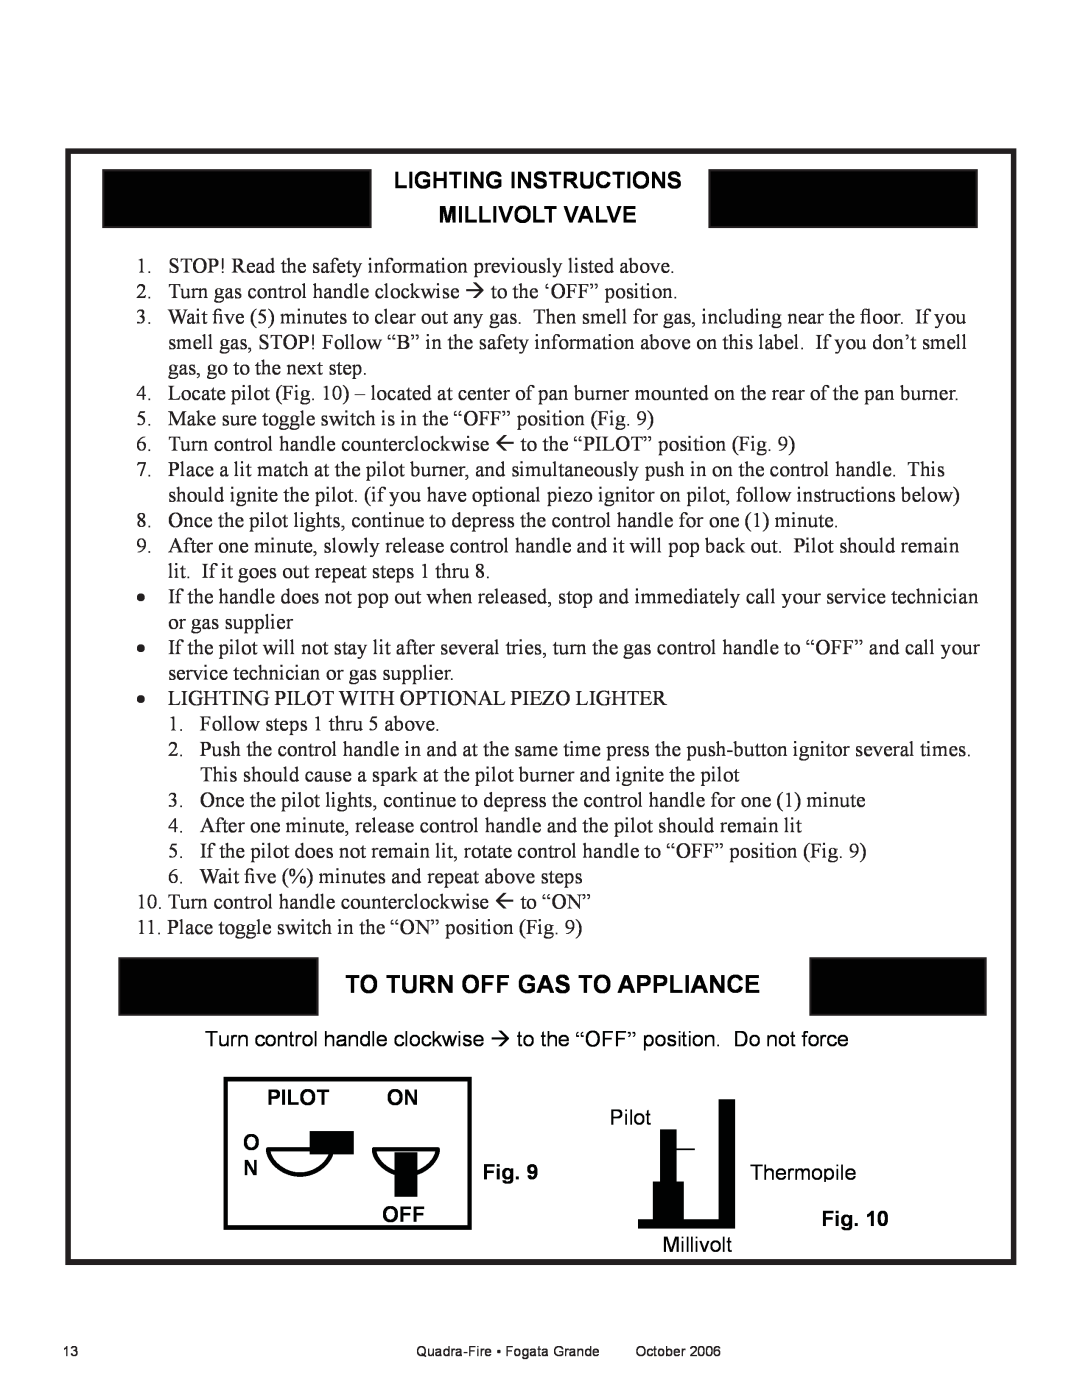 Quadra-Fire FG21SP-NG, FG21SP-LP owner manual To Turn Off Gas To Appliance, Lighting Instructions Millivolt Valve 